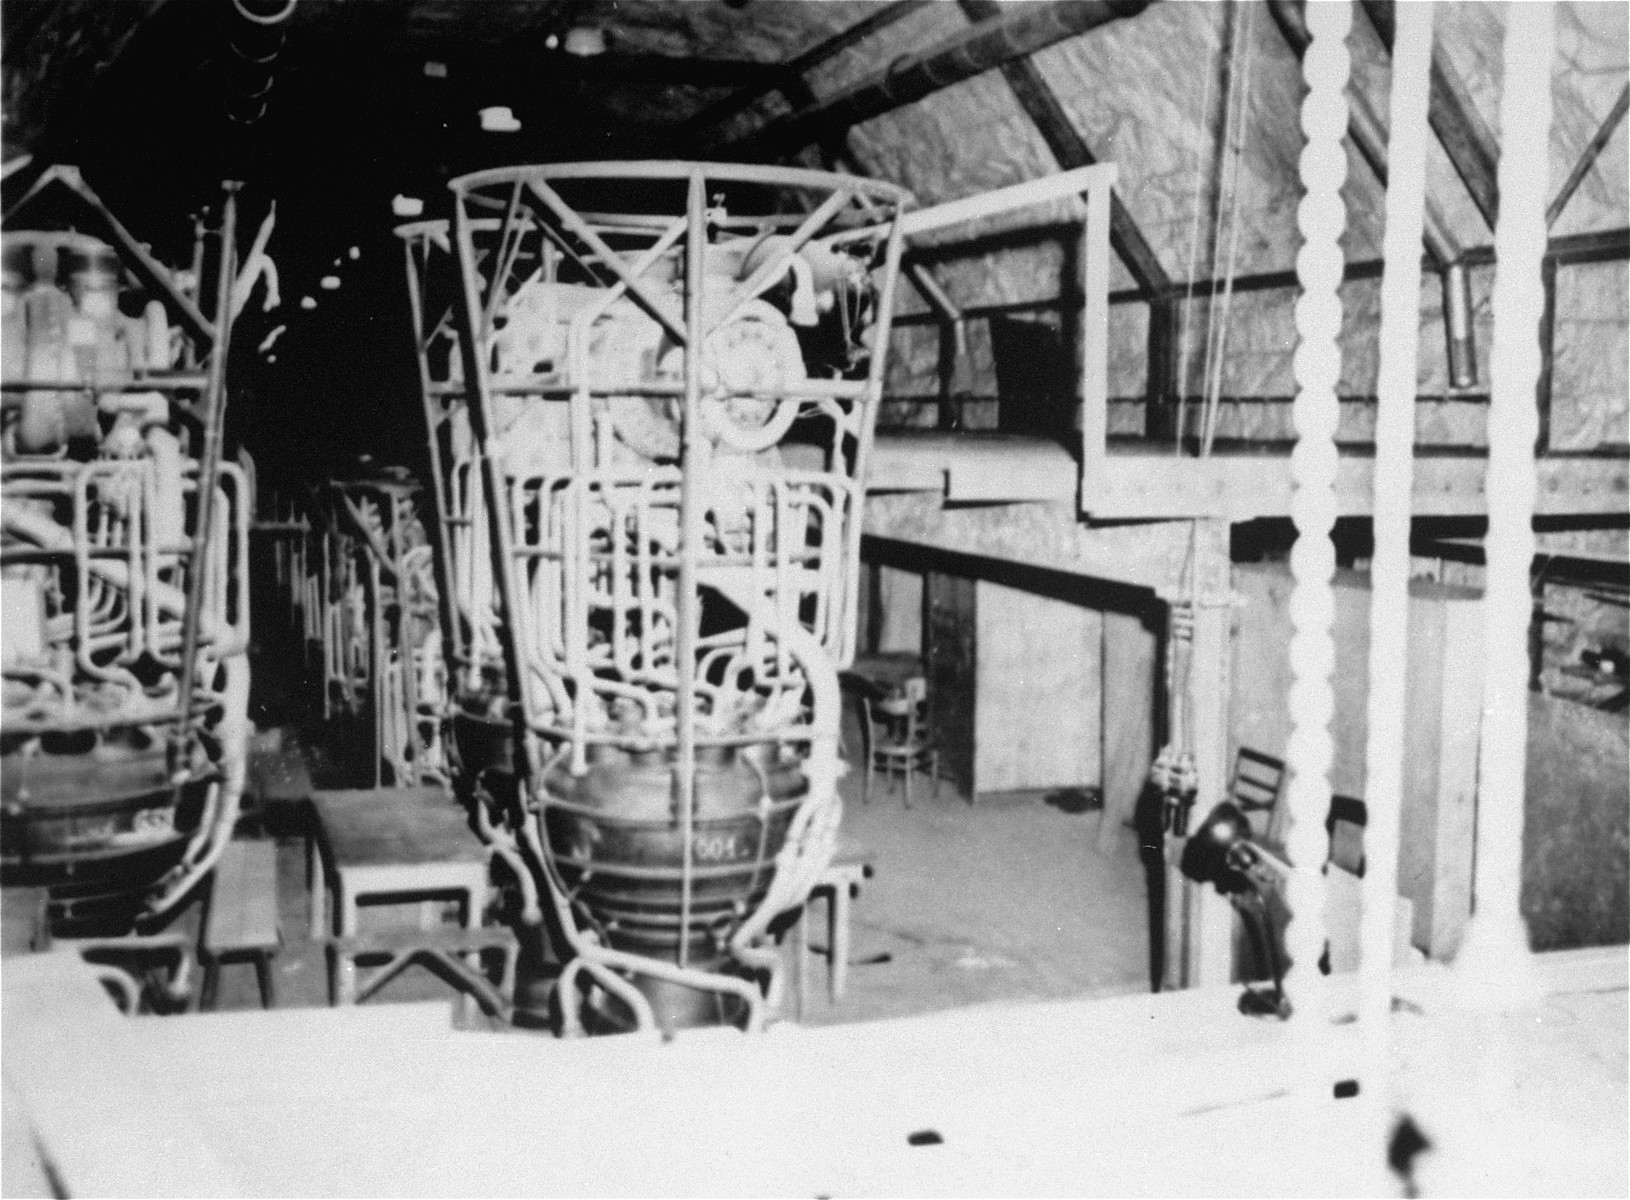 The propulsion unit assembly section of the underground rocket factory at Dora-Mittelbau.